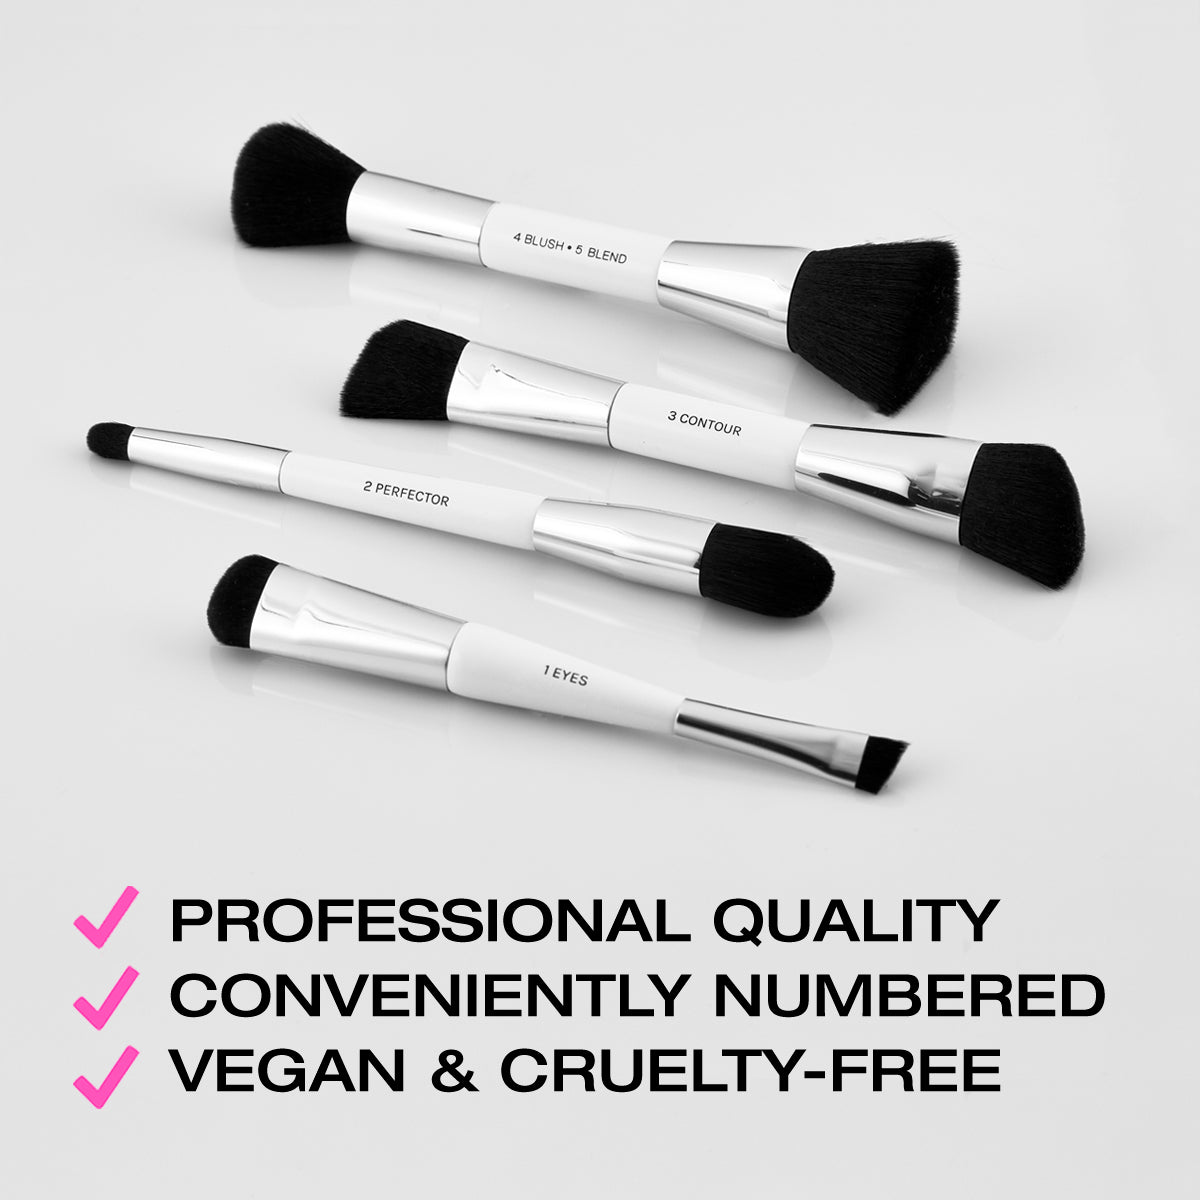 Essential brush set containing 4 dual ended brushes. 1 eyeshadow brush, 2 concealer brush, 3 contour highlighter brush, 4 blush and blend brush. Professional quality brushes numbered to correlate with our Fold out Face Palette. Dense fluffy brushes that are completely vegan and cruelty free.